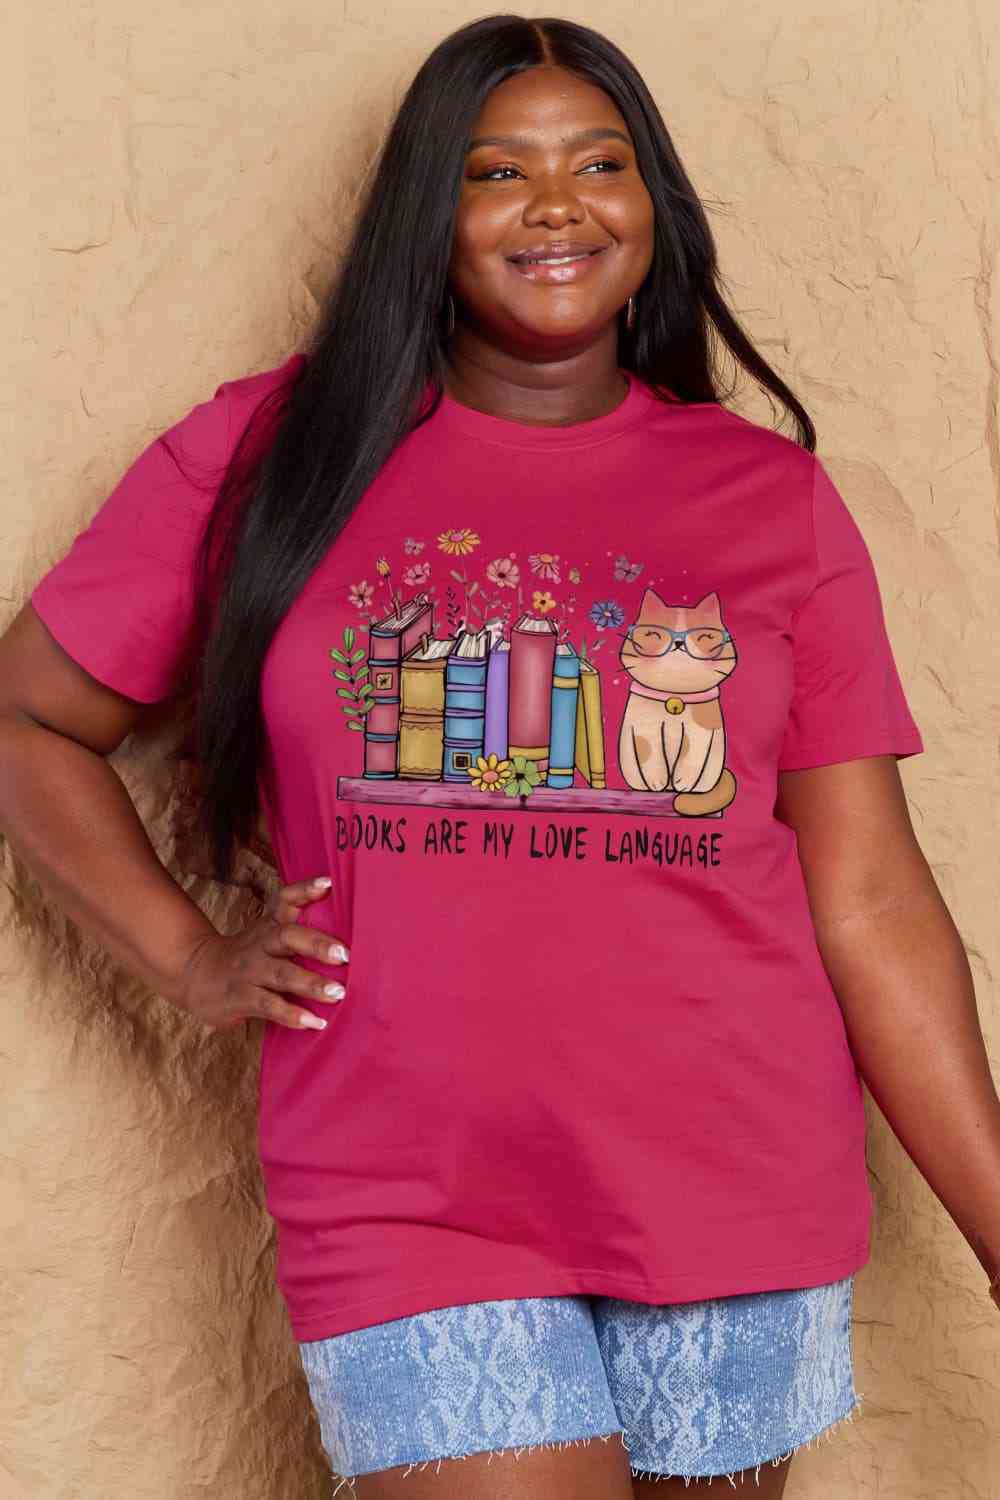 BOOKS ARE MY LOVE LANGUAGE Tee – Where Reading Meets Kitty Cuddles! 🌸🐾